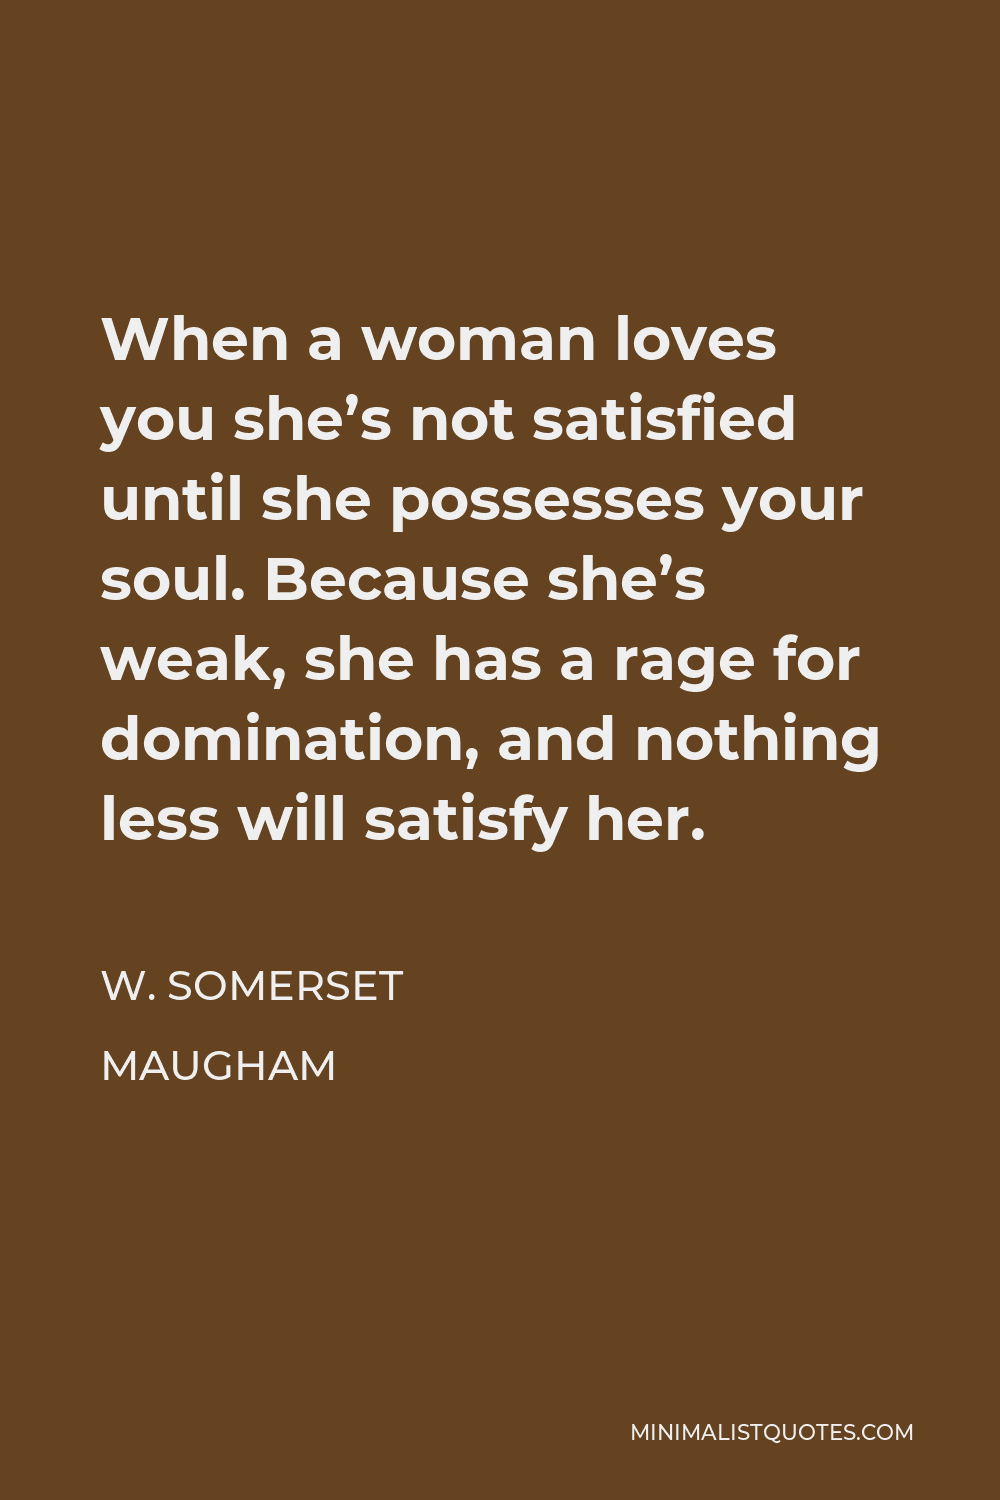 W. Somerset Maugham Quote - When a woman loves you she’s not satisfied until she possesses your soul. Because she’s weak, she has a rage for domination, and nothing less will satisfy her.